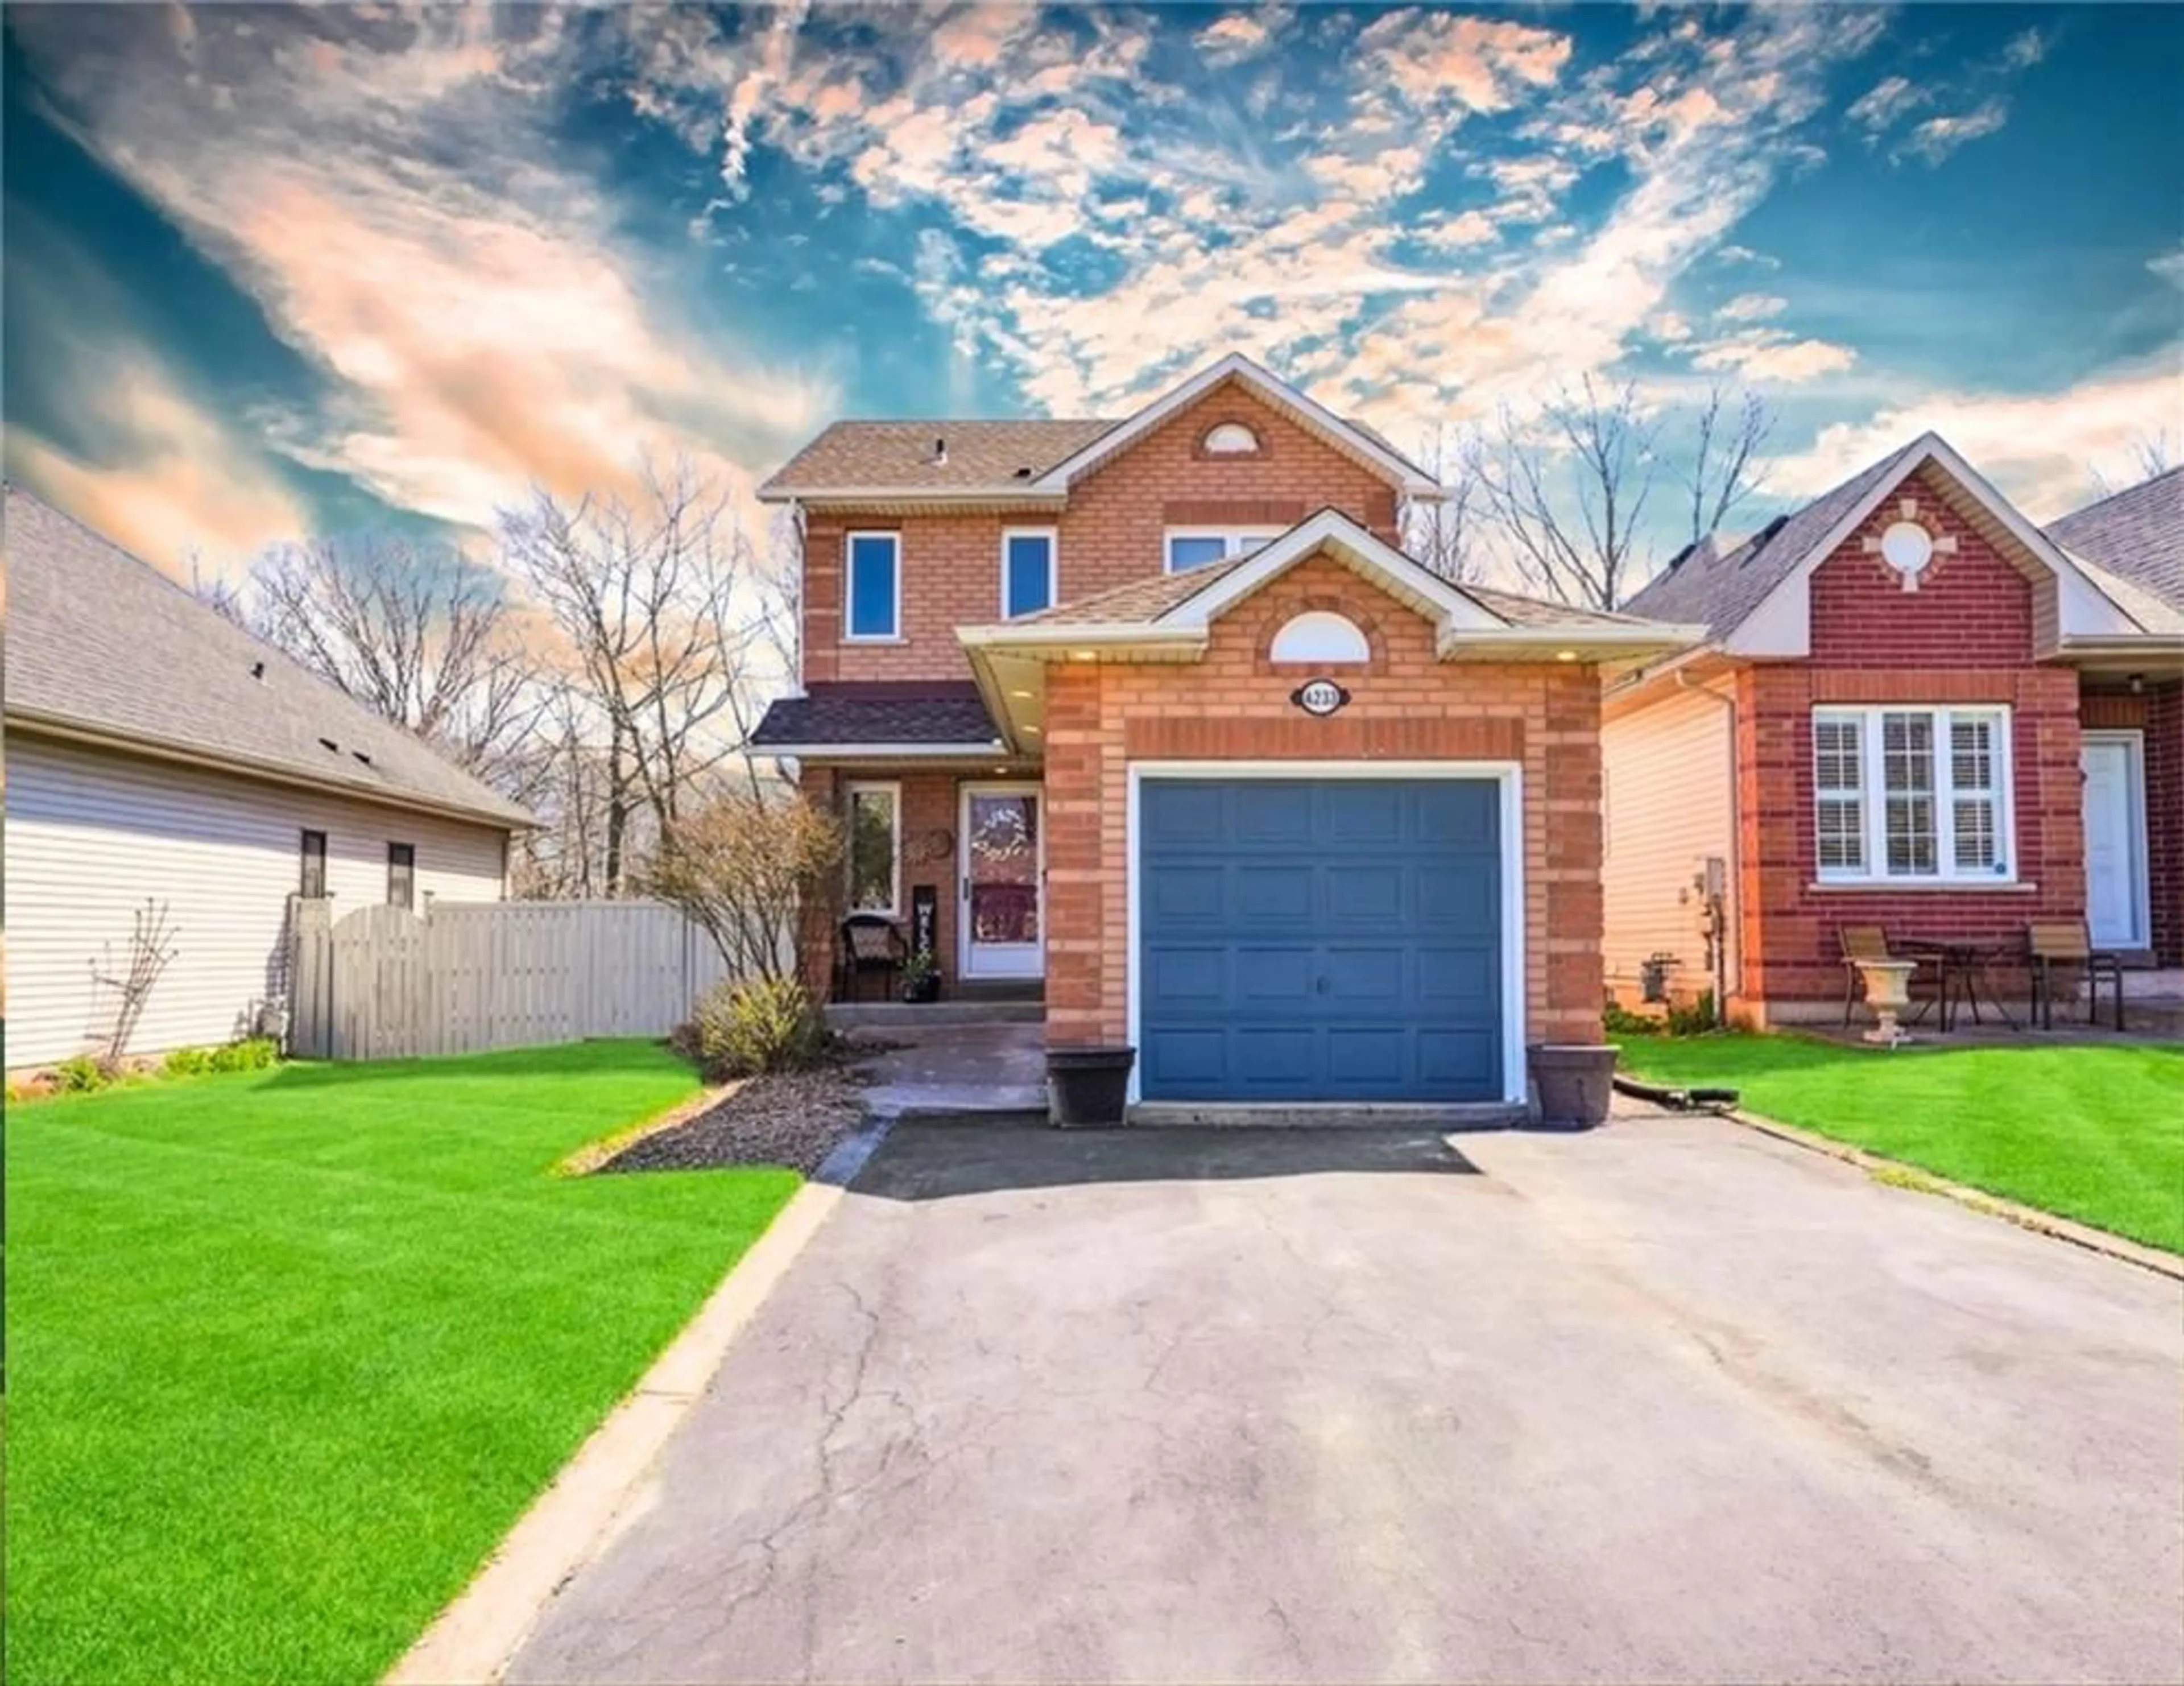 Home with brick exterior material for 4233 STADELBAUER Dr, Beamsville Ontario L3J 0J9